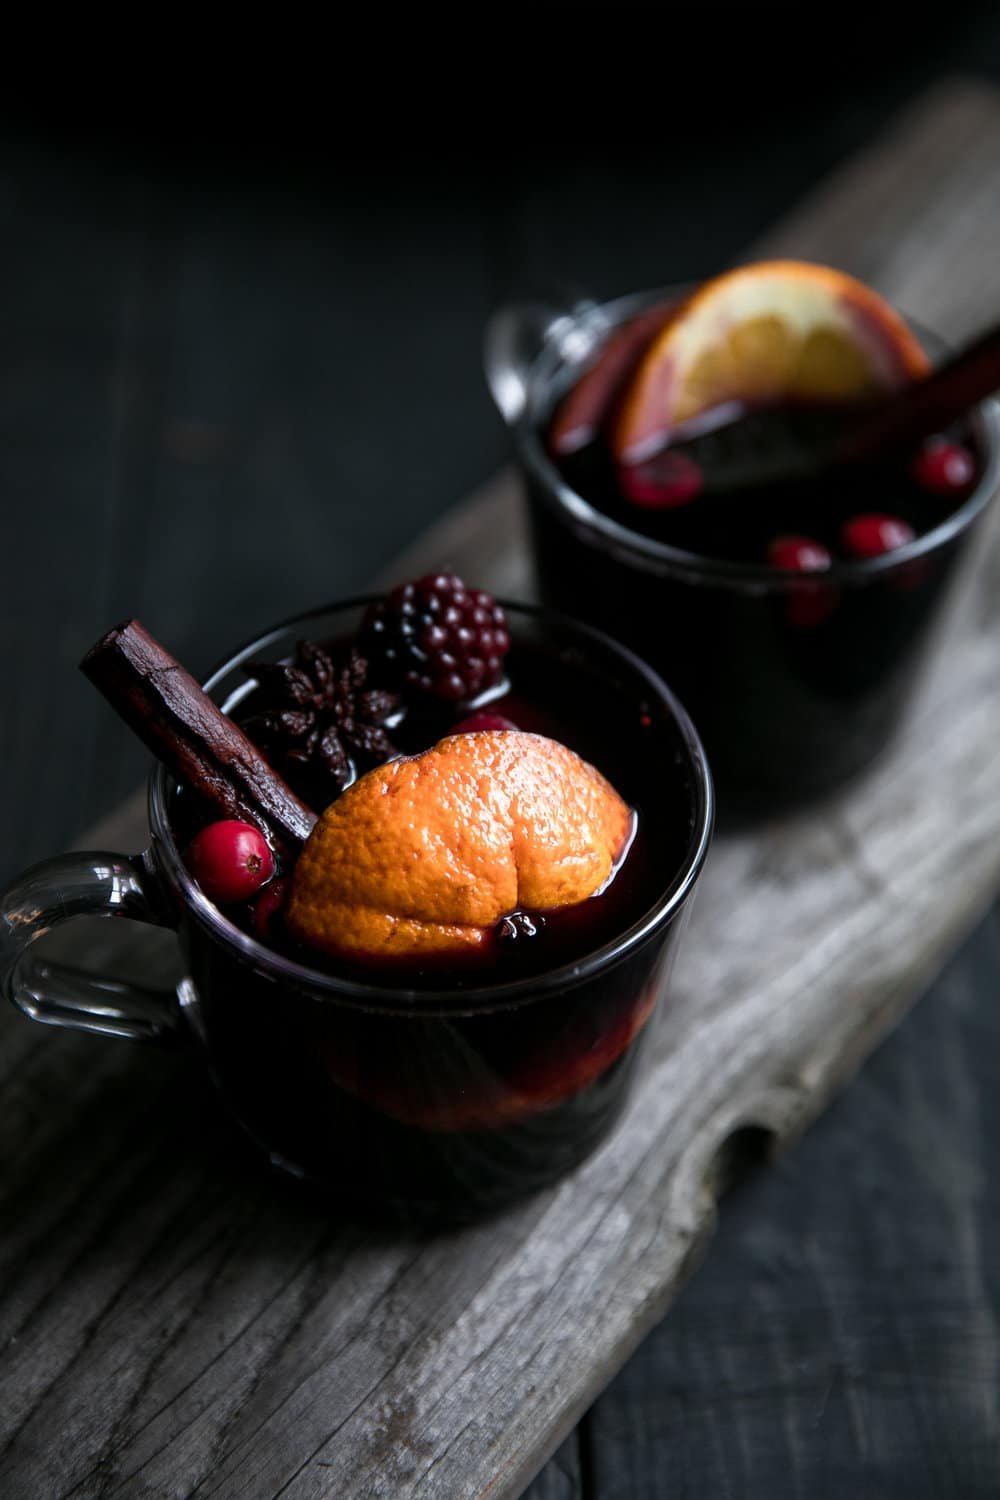 Two clear glasses filled with mulled wine and garnished with orange slices, cinnamon sticks, and blackberries.